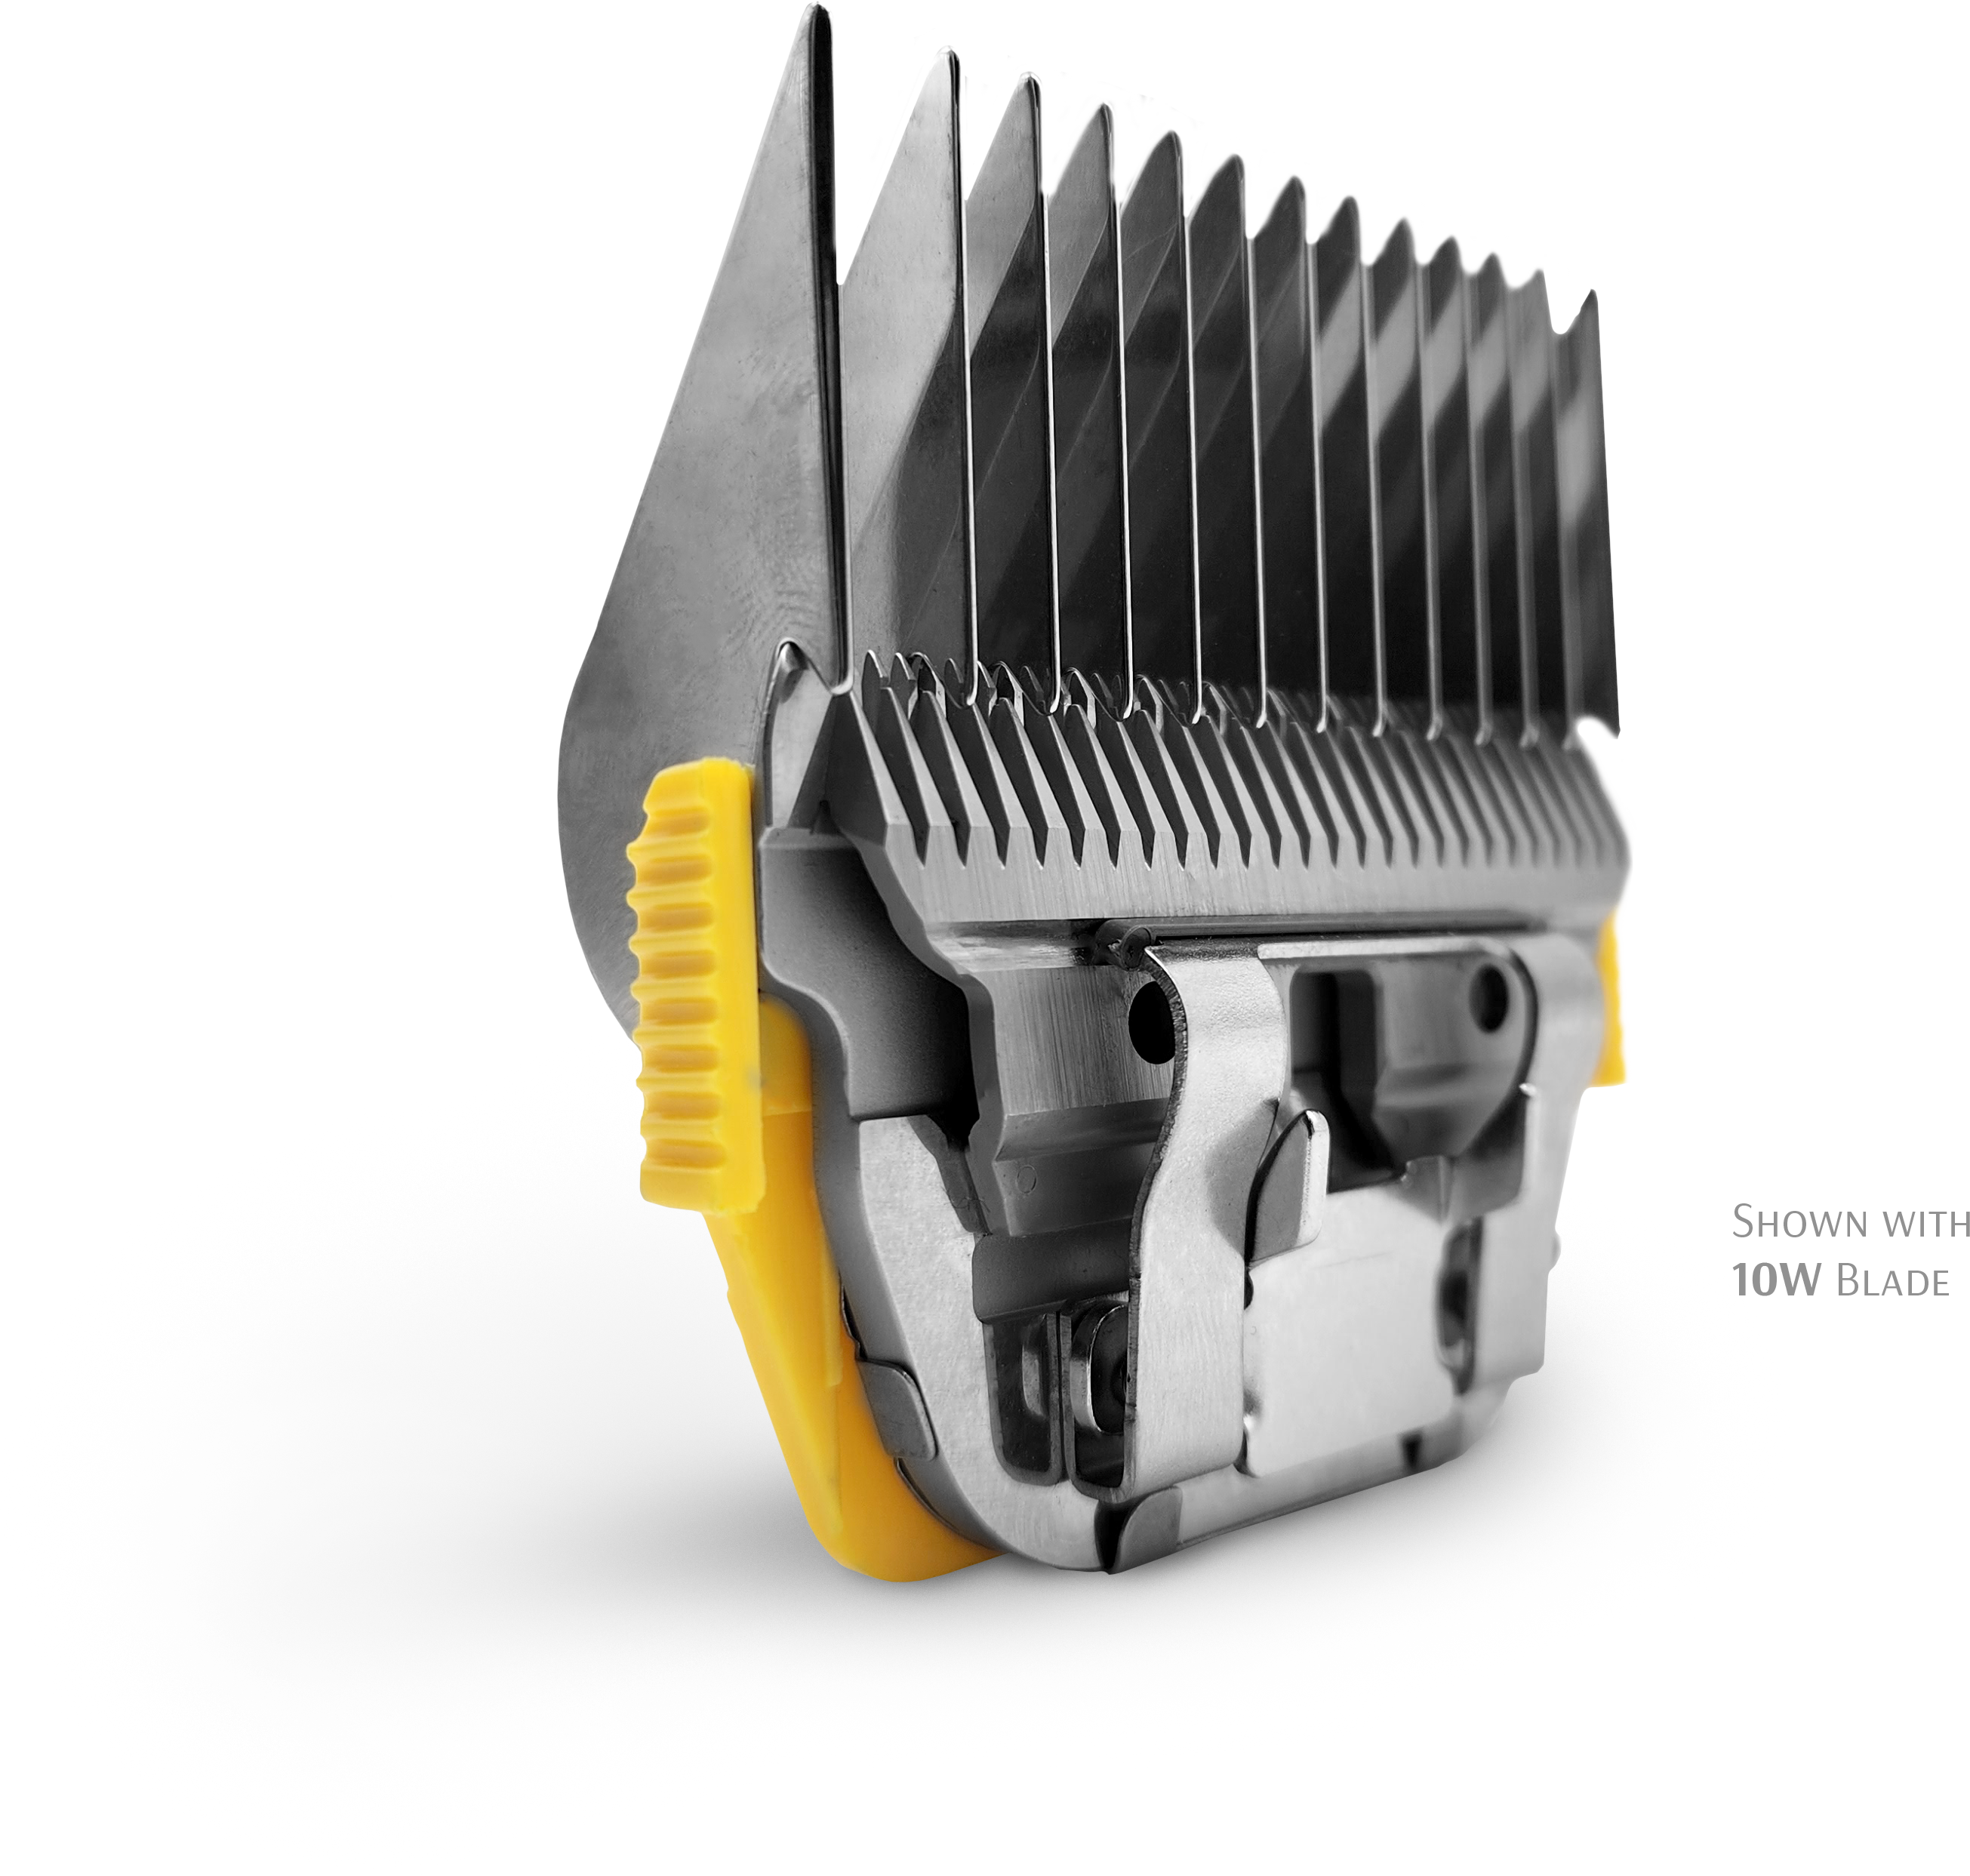 10w blade on wide comb